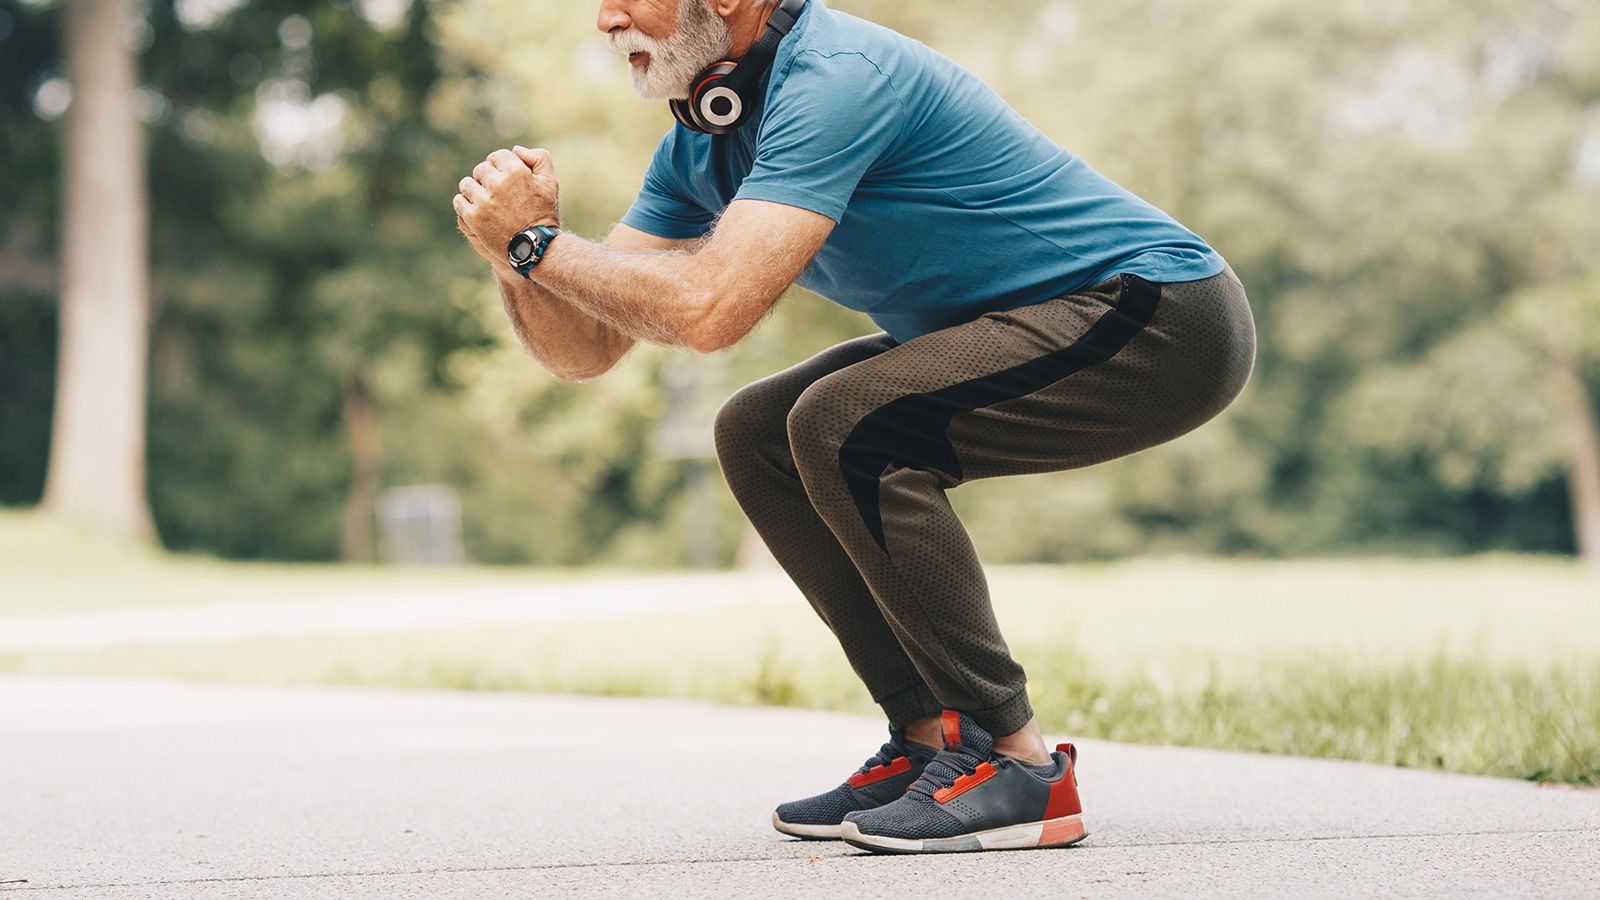 How can strength training build healthier bodies as we age?